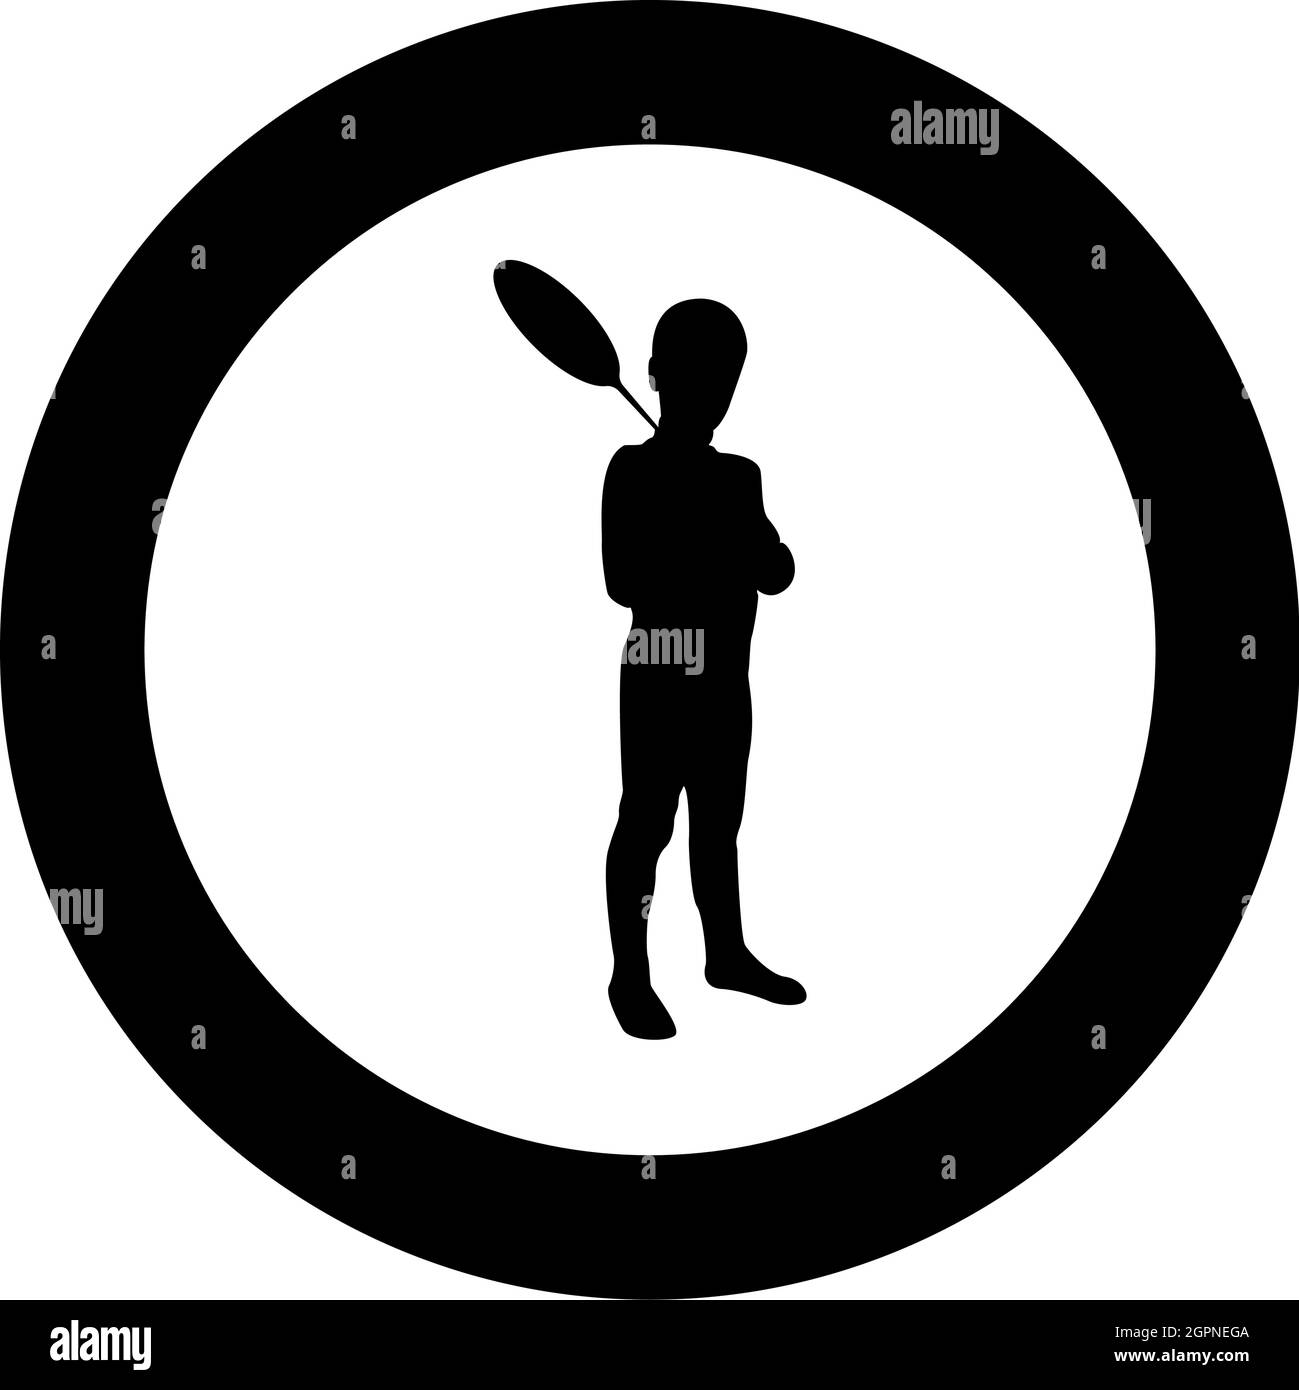 Boy holds badminton racket Cute young child holding standing toy shuttlecock Happy concept Teenage action Summer sport activity Camp concept Kid will play Having fun silhouette in circle round black color vector illustration solid outline style image Stock Vector